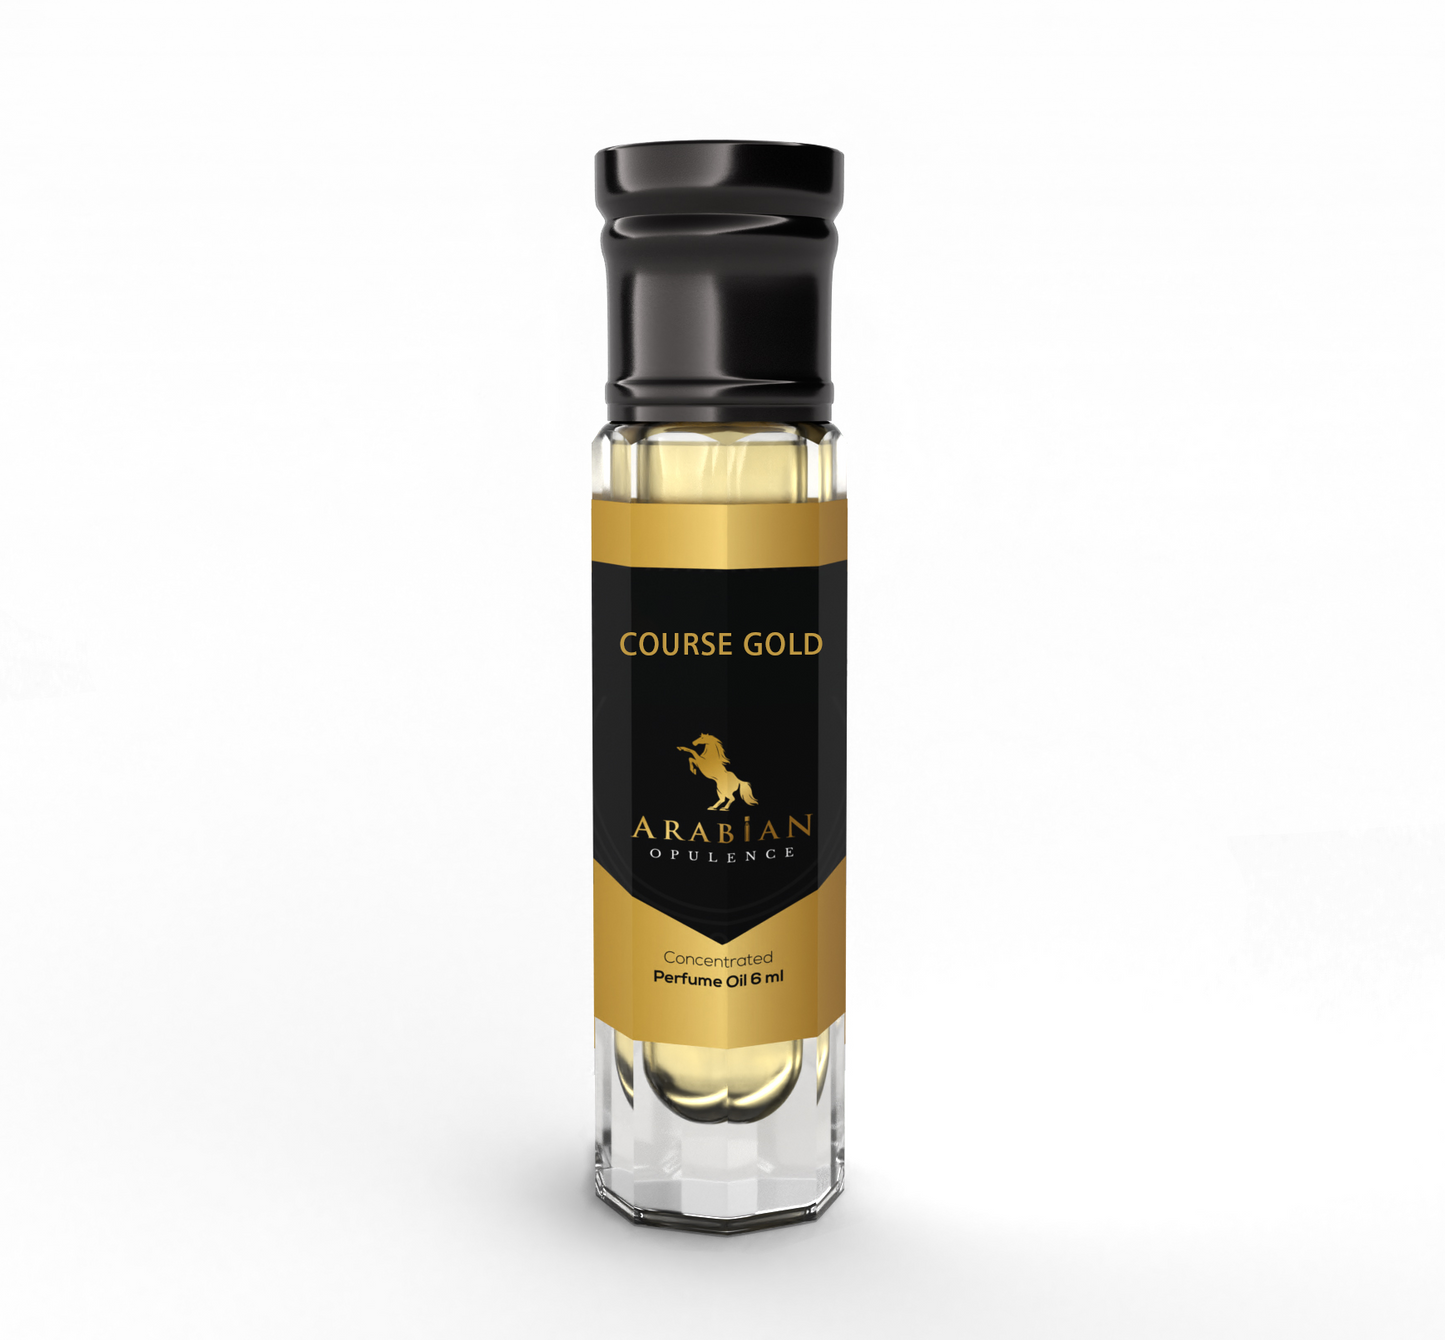 FR198 COURSE GOLD FOR HER - Perfume Body Oil - Alcohol Free